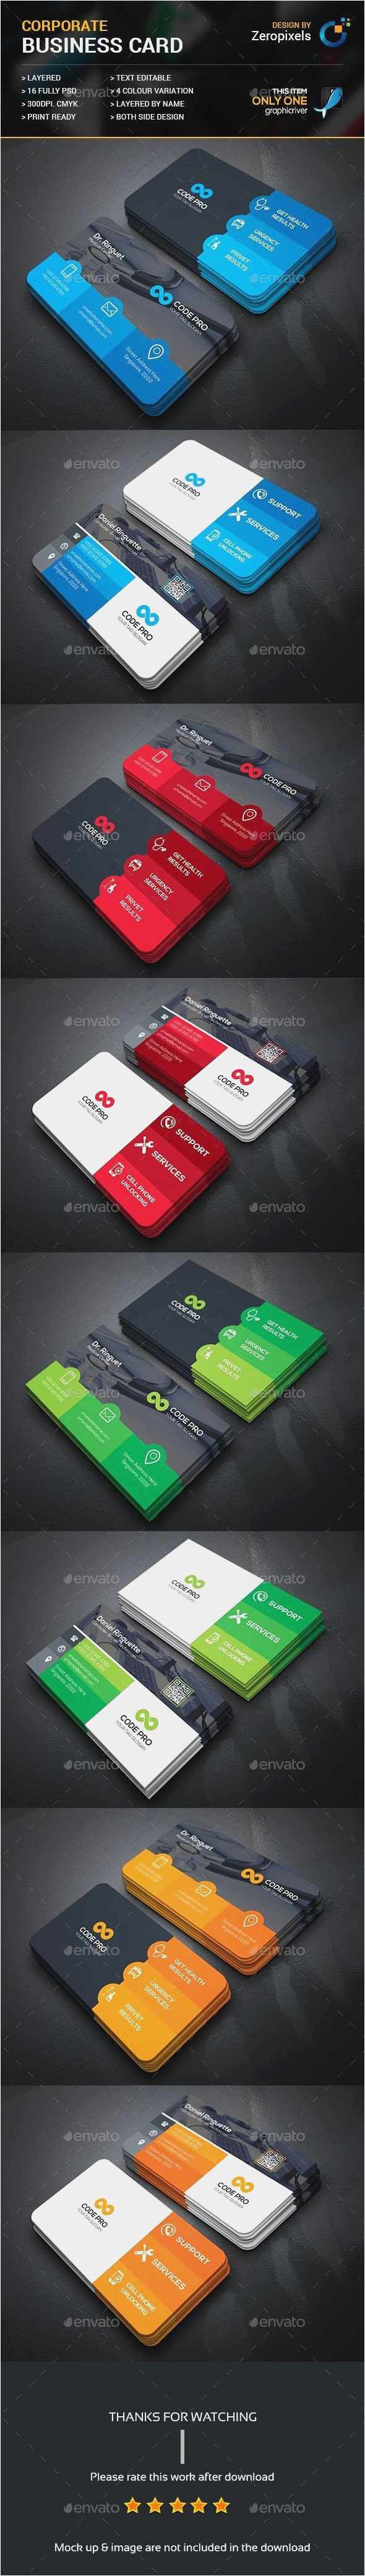 free free business card templates psd luxury business card template psd examples